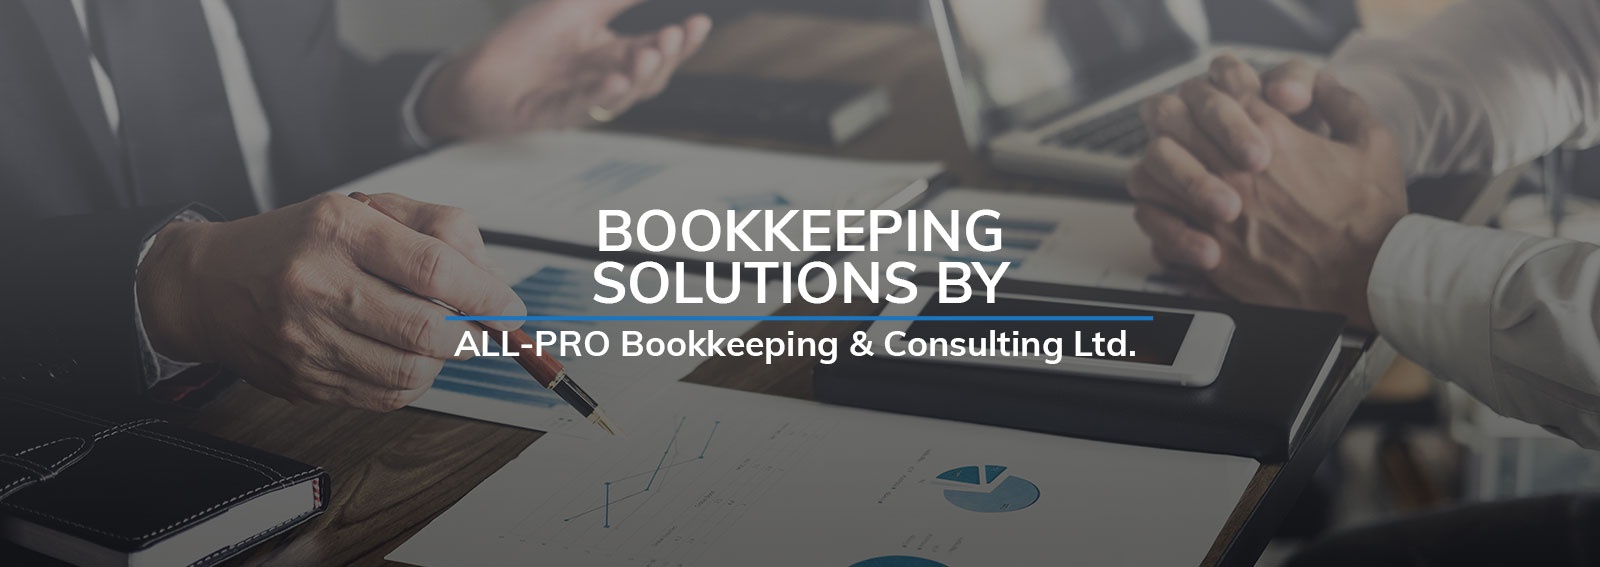 Bookkeeping Services in Calgary, AB